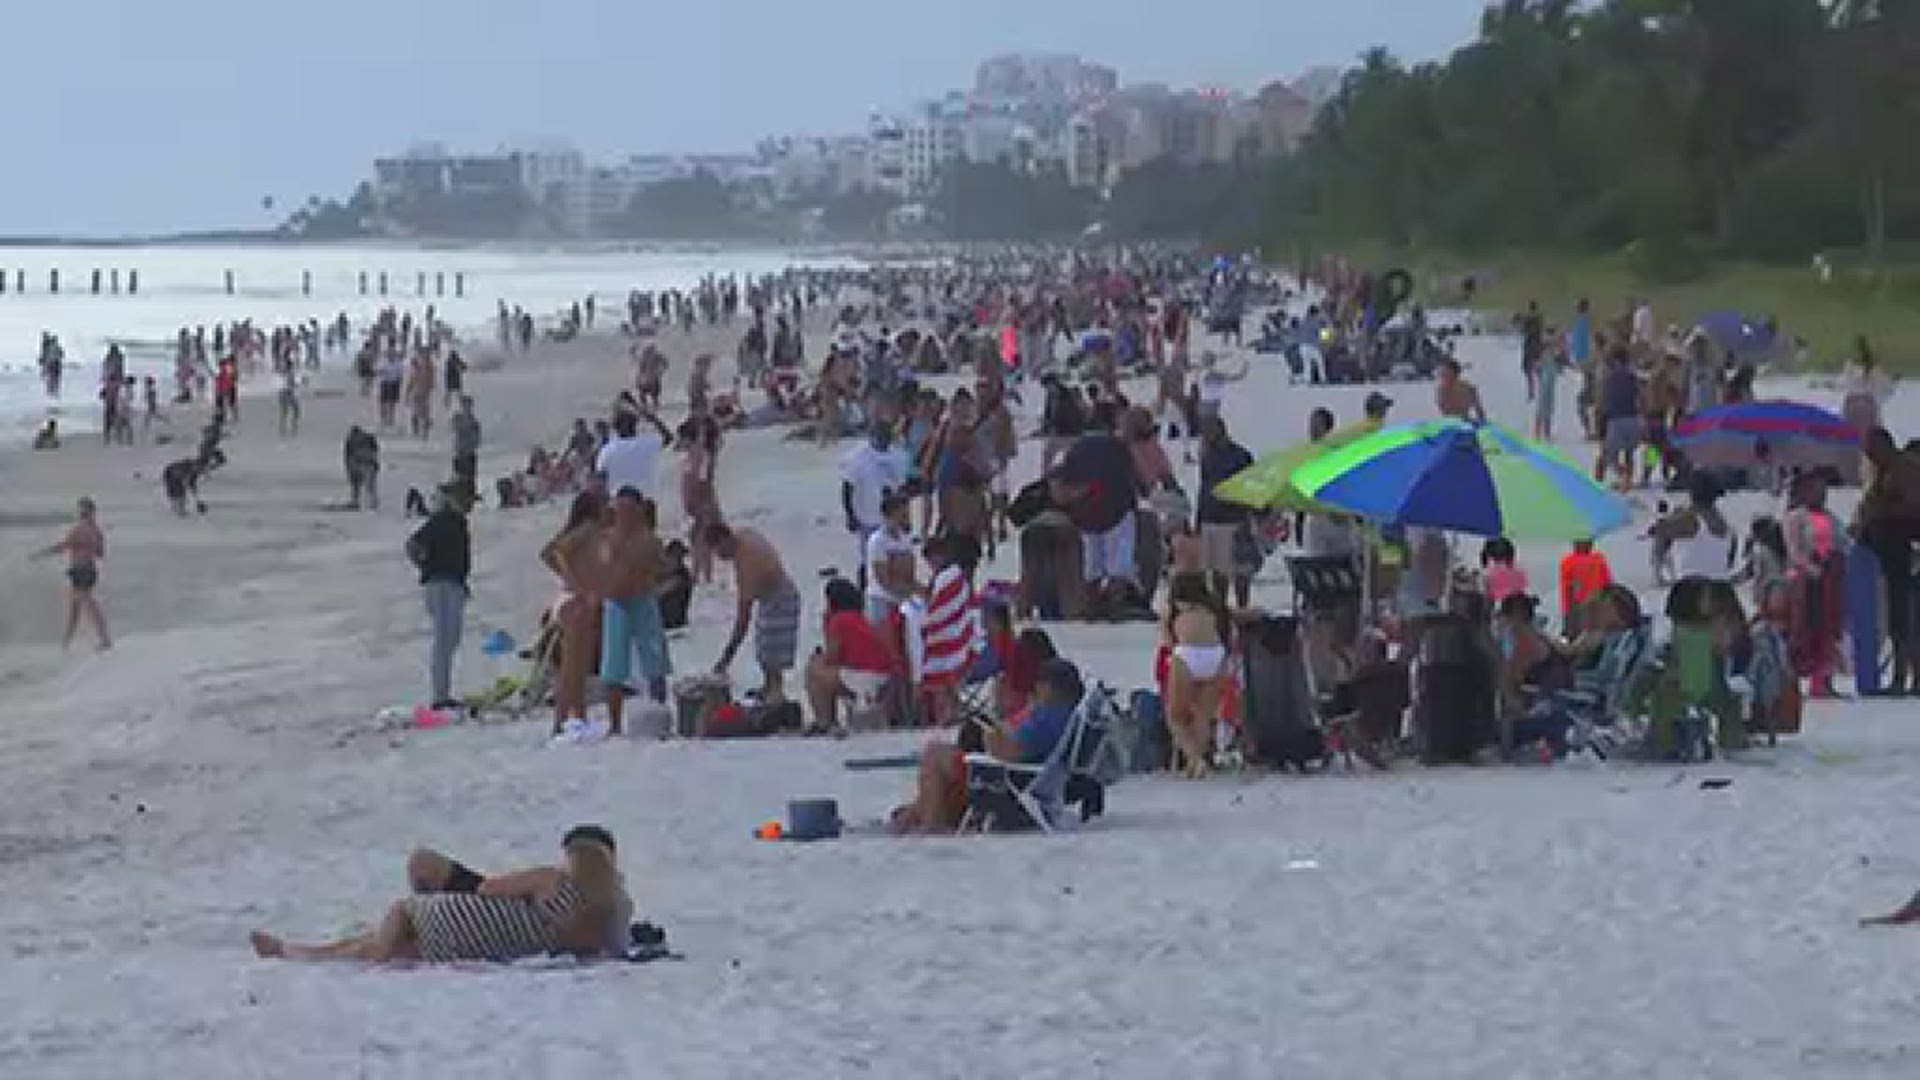 Ten days after reopening its beaches, one southwest Florida city is closing them back down.